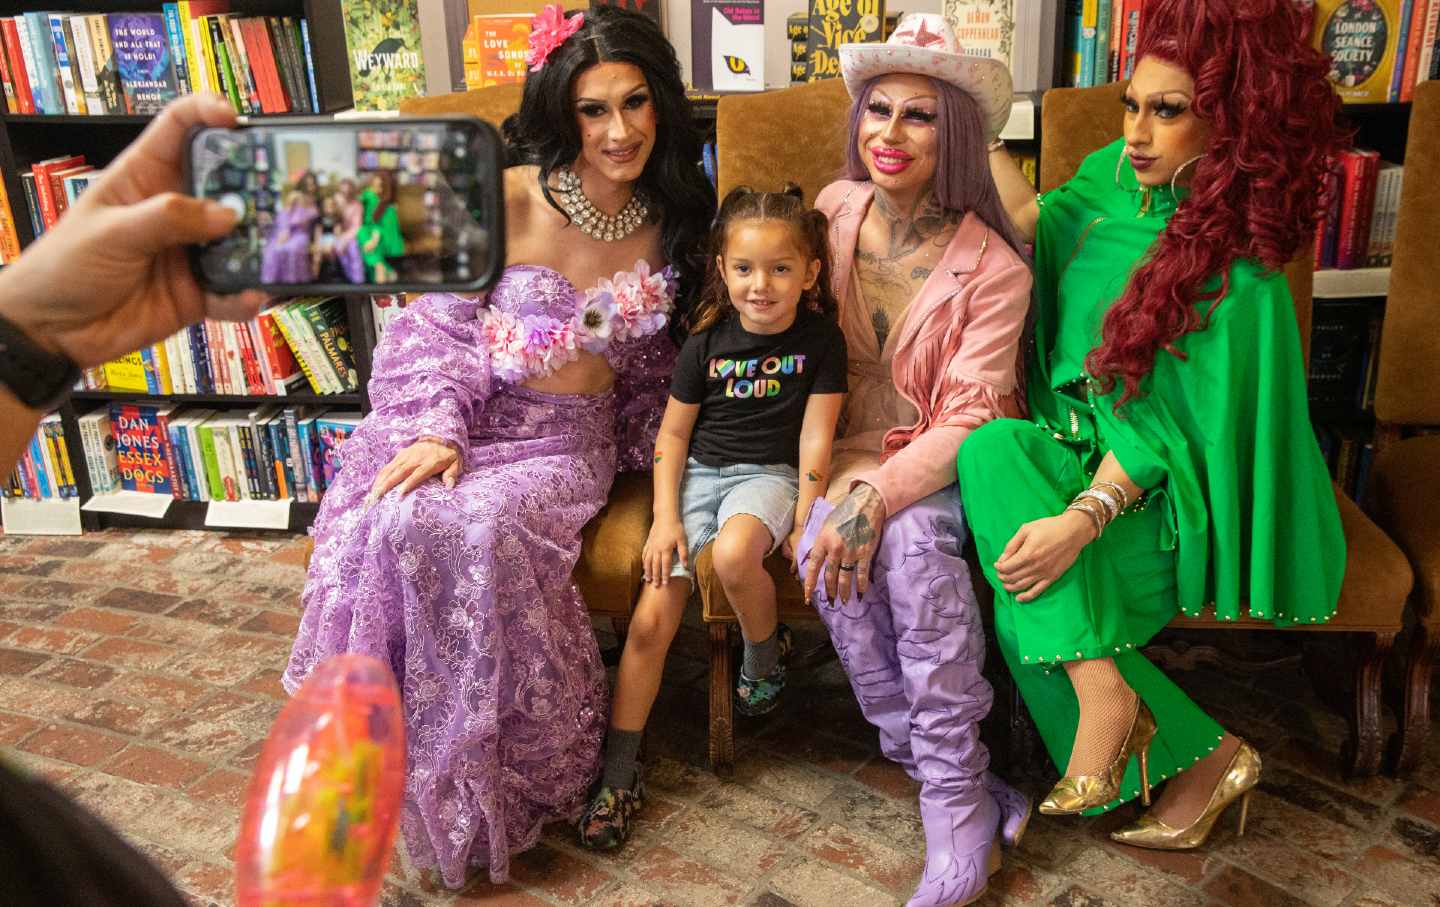 Jennyvieve Barquero-Hughes, 4, in black, gets her photo taken with Drag Queens Kelly K, left, Scalene OnixXx and Athena Monet Kills at the Drag Queen story hour at the Cellar Door Bookstore on Saturday, April 29, 2023 in Riverside, Calif.